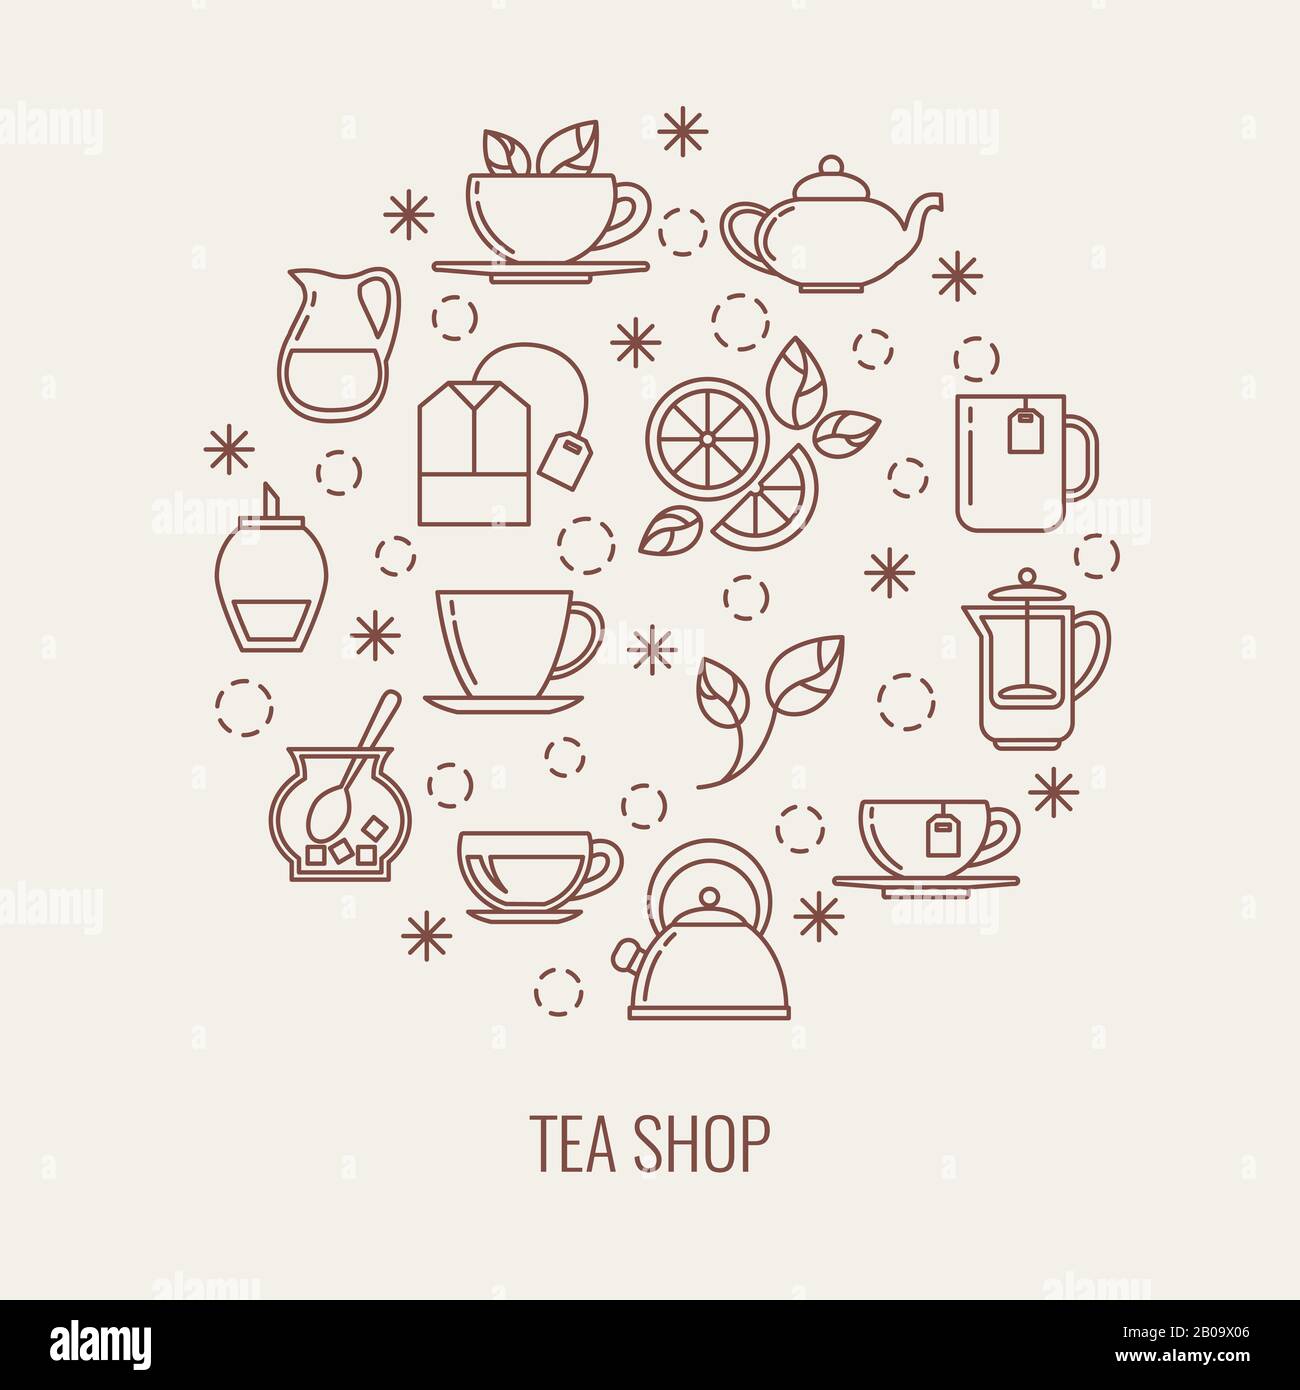 Tea thin line vector icons set in a circle. Outline tea icons concept illustration Stock Vector